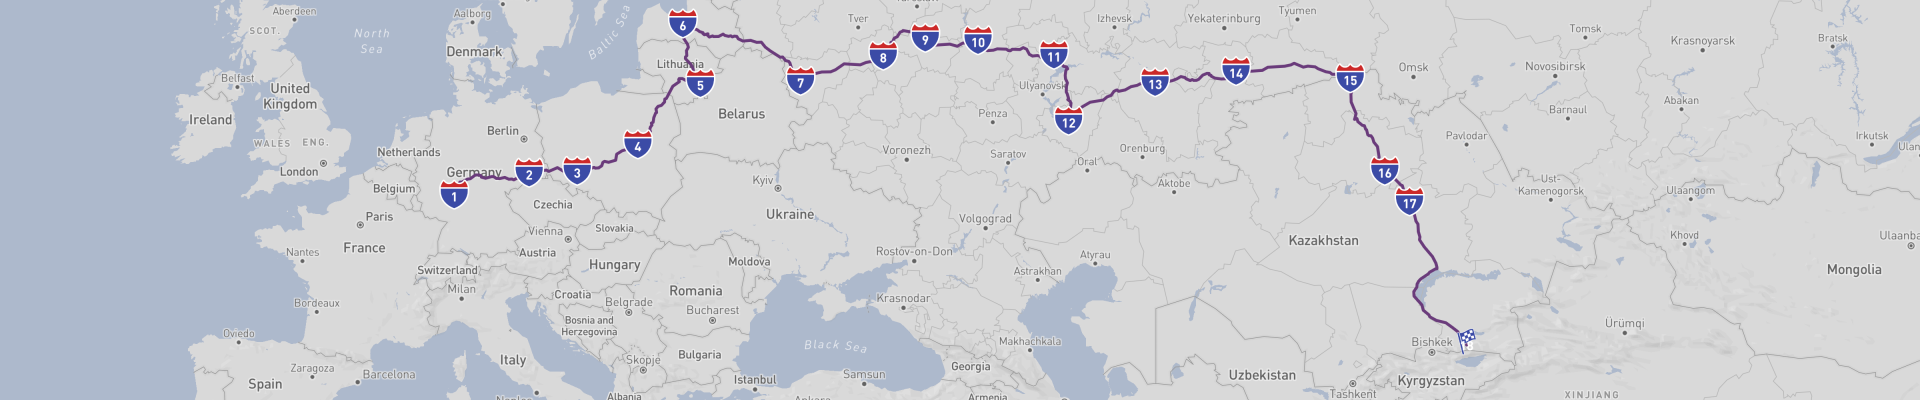 Europe to Central Asia Overland Road Trip